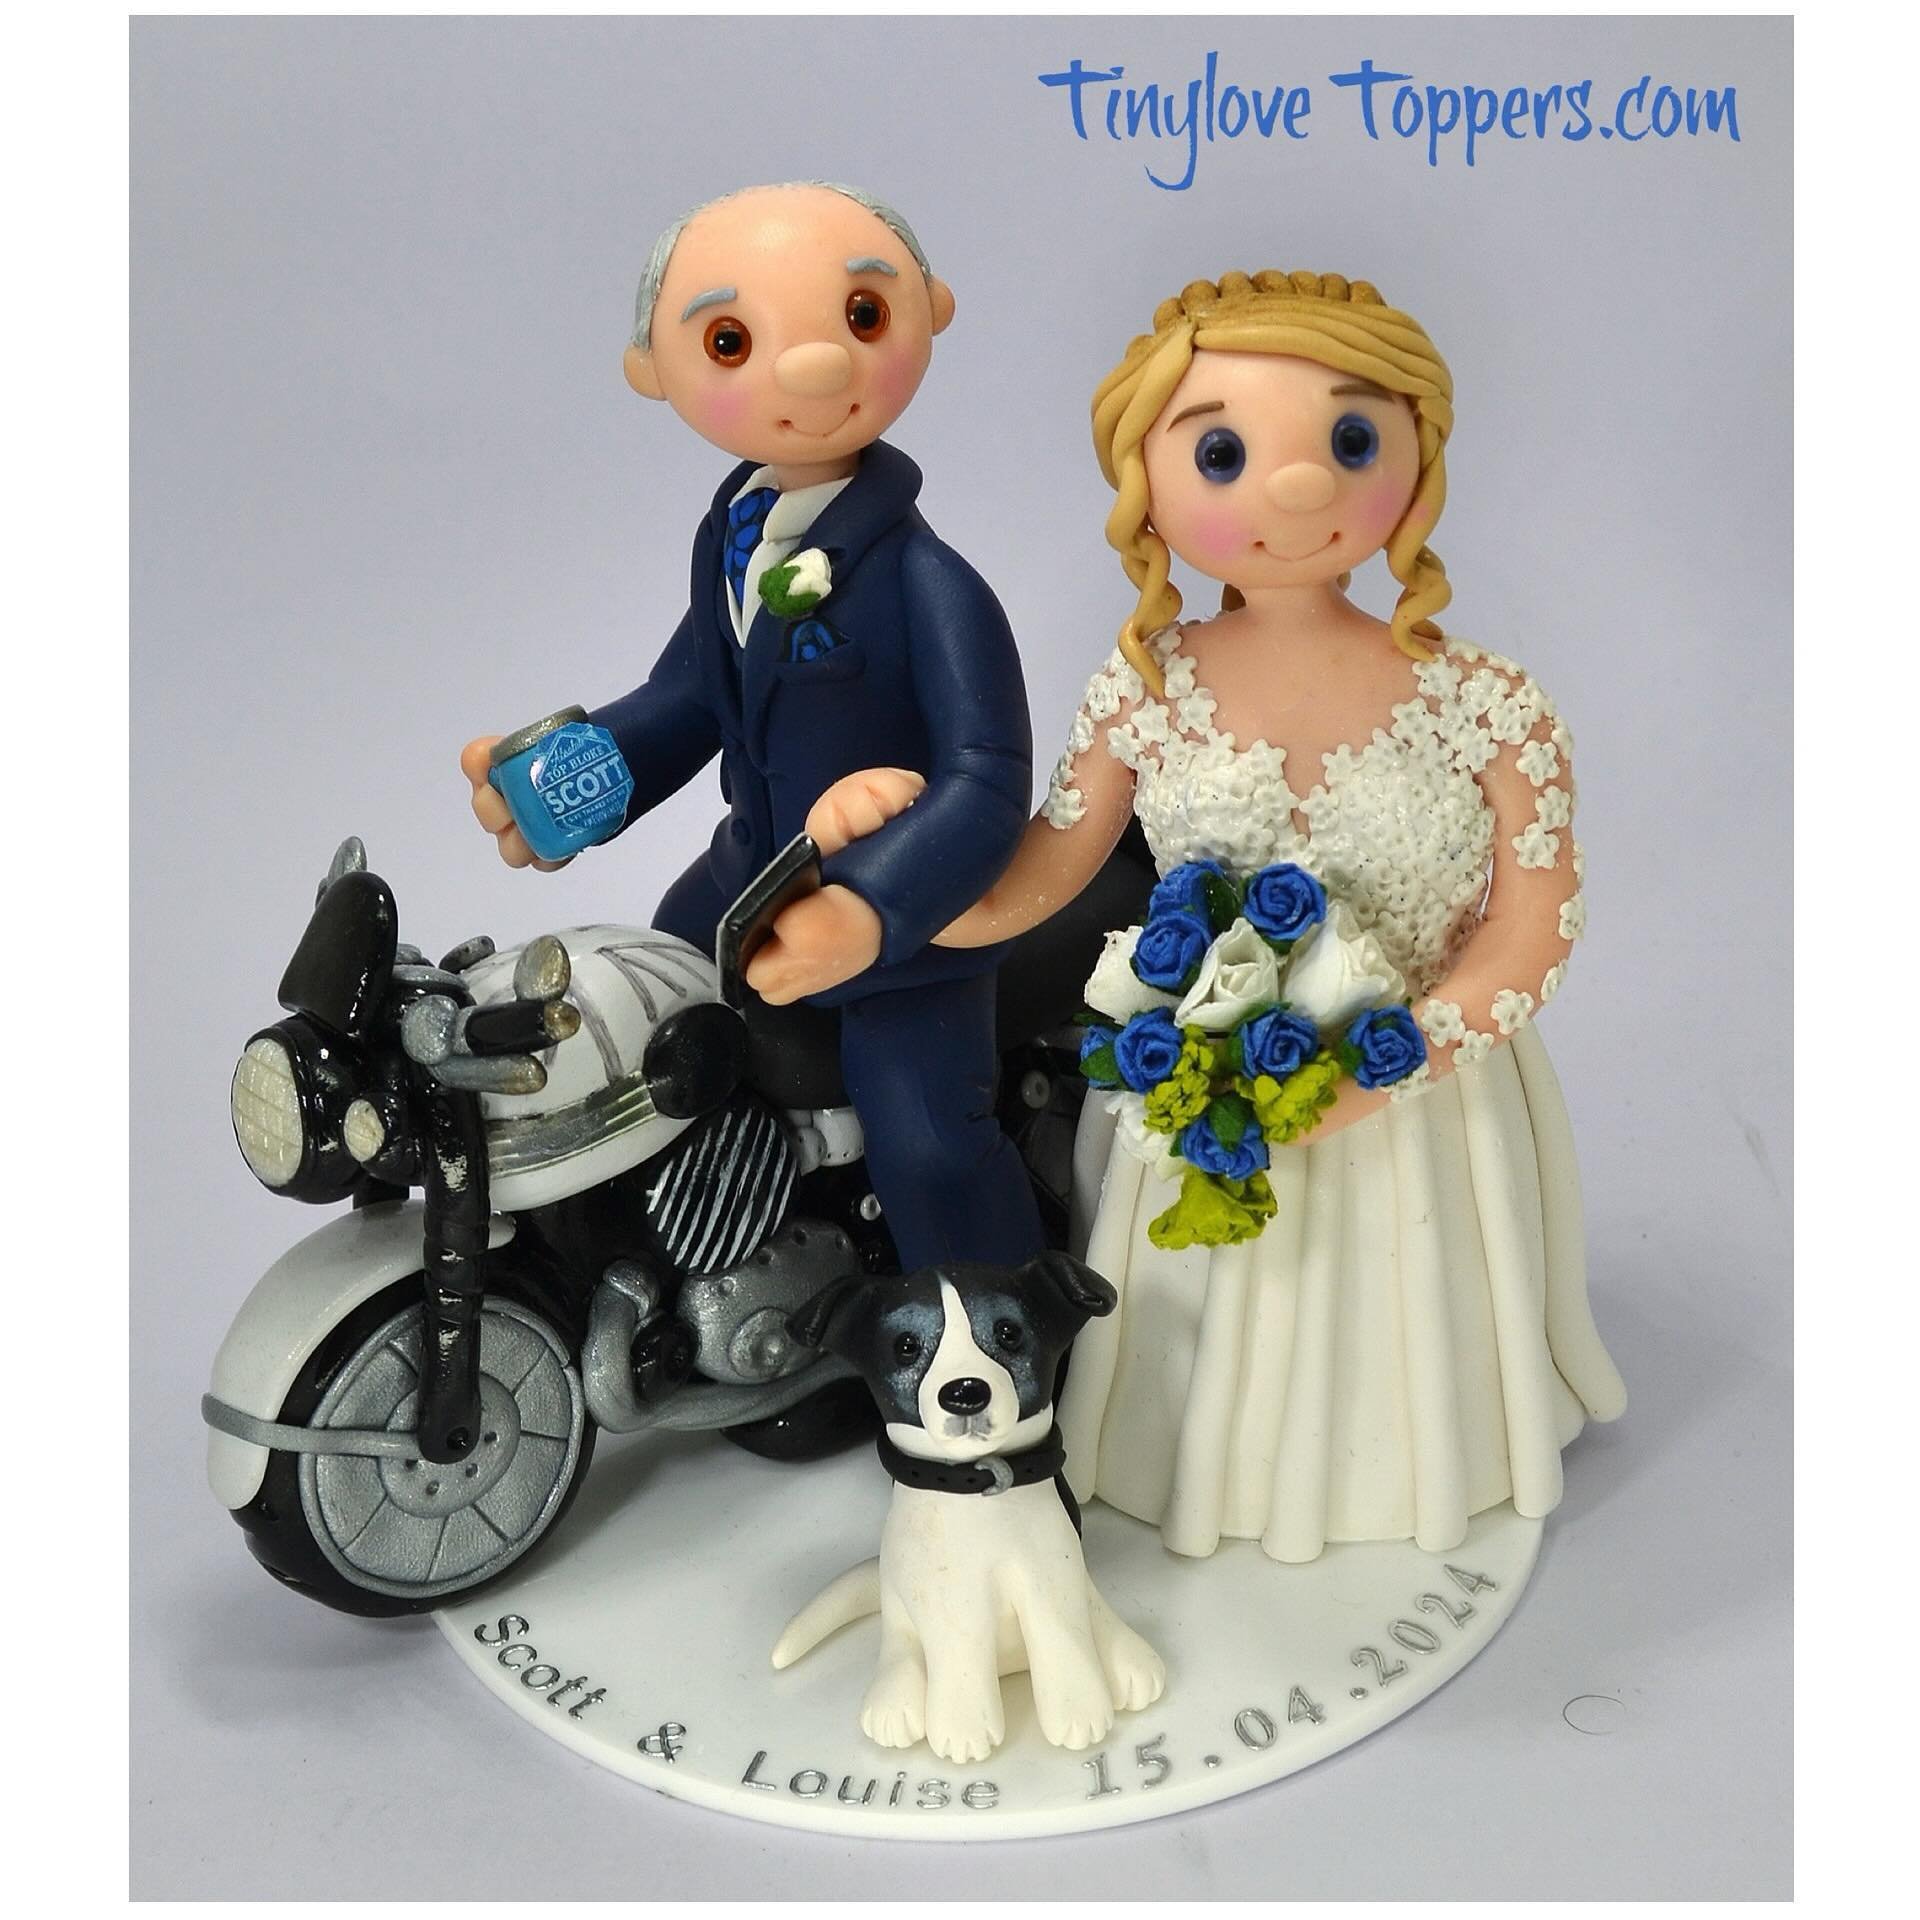 Are you getting married in 2024 or 2025?
would you like a personalised wedding cake topper that you can keep for a lifetime? 
Personalised non edible wedding cake toppers.
made to look like you, lifelong keepsakes.
Message me if you would like a quot